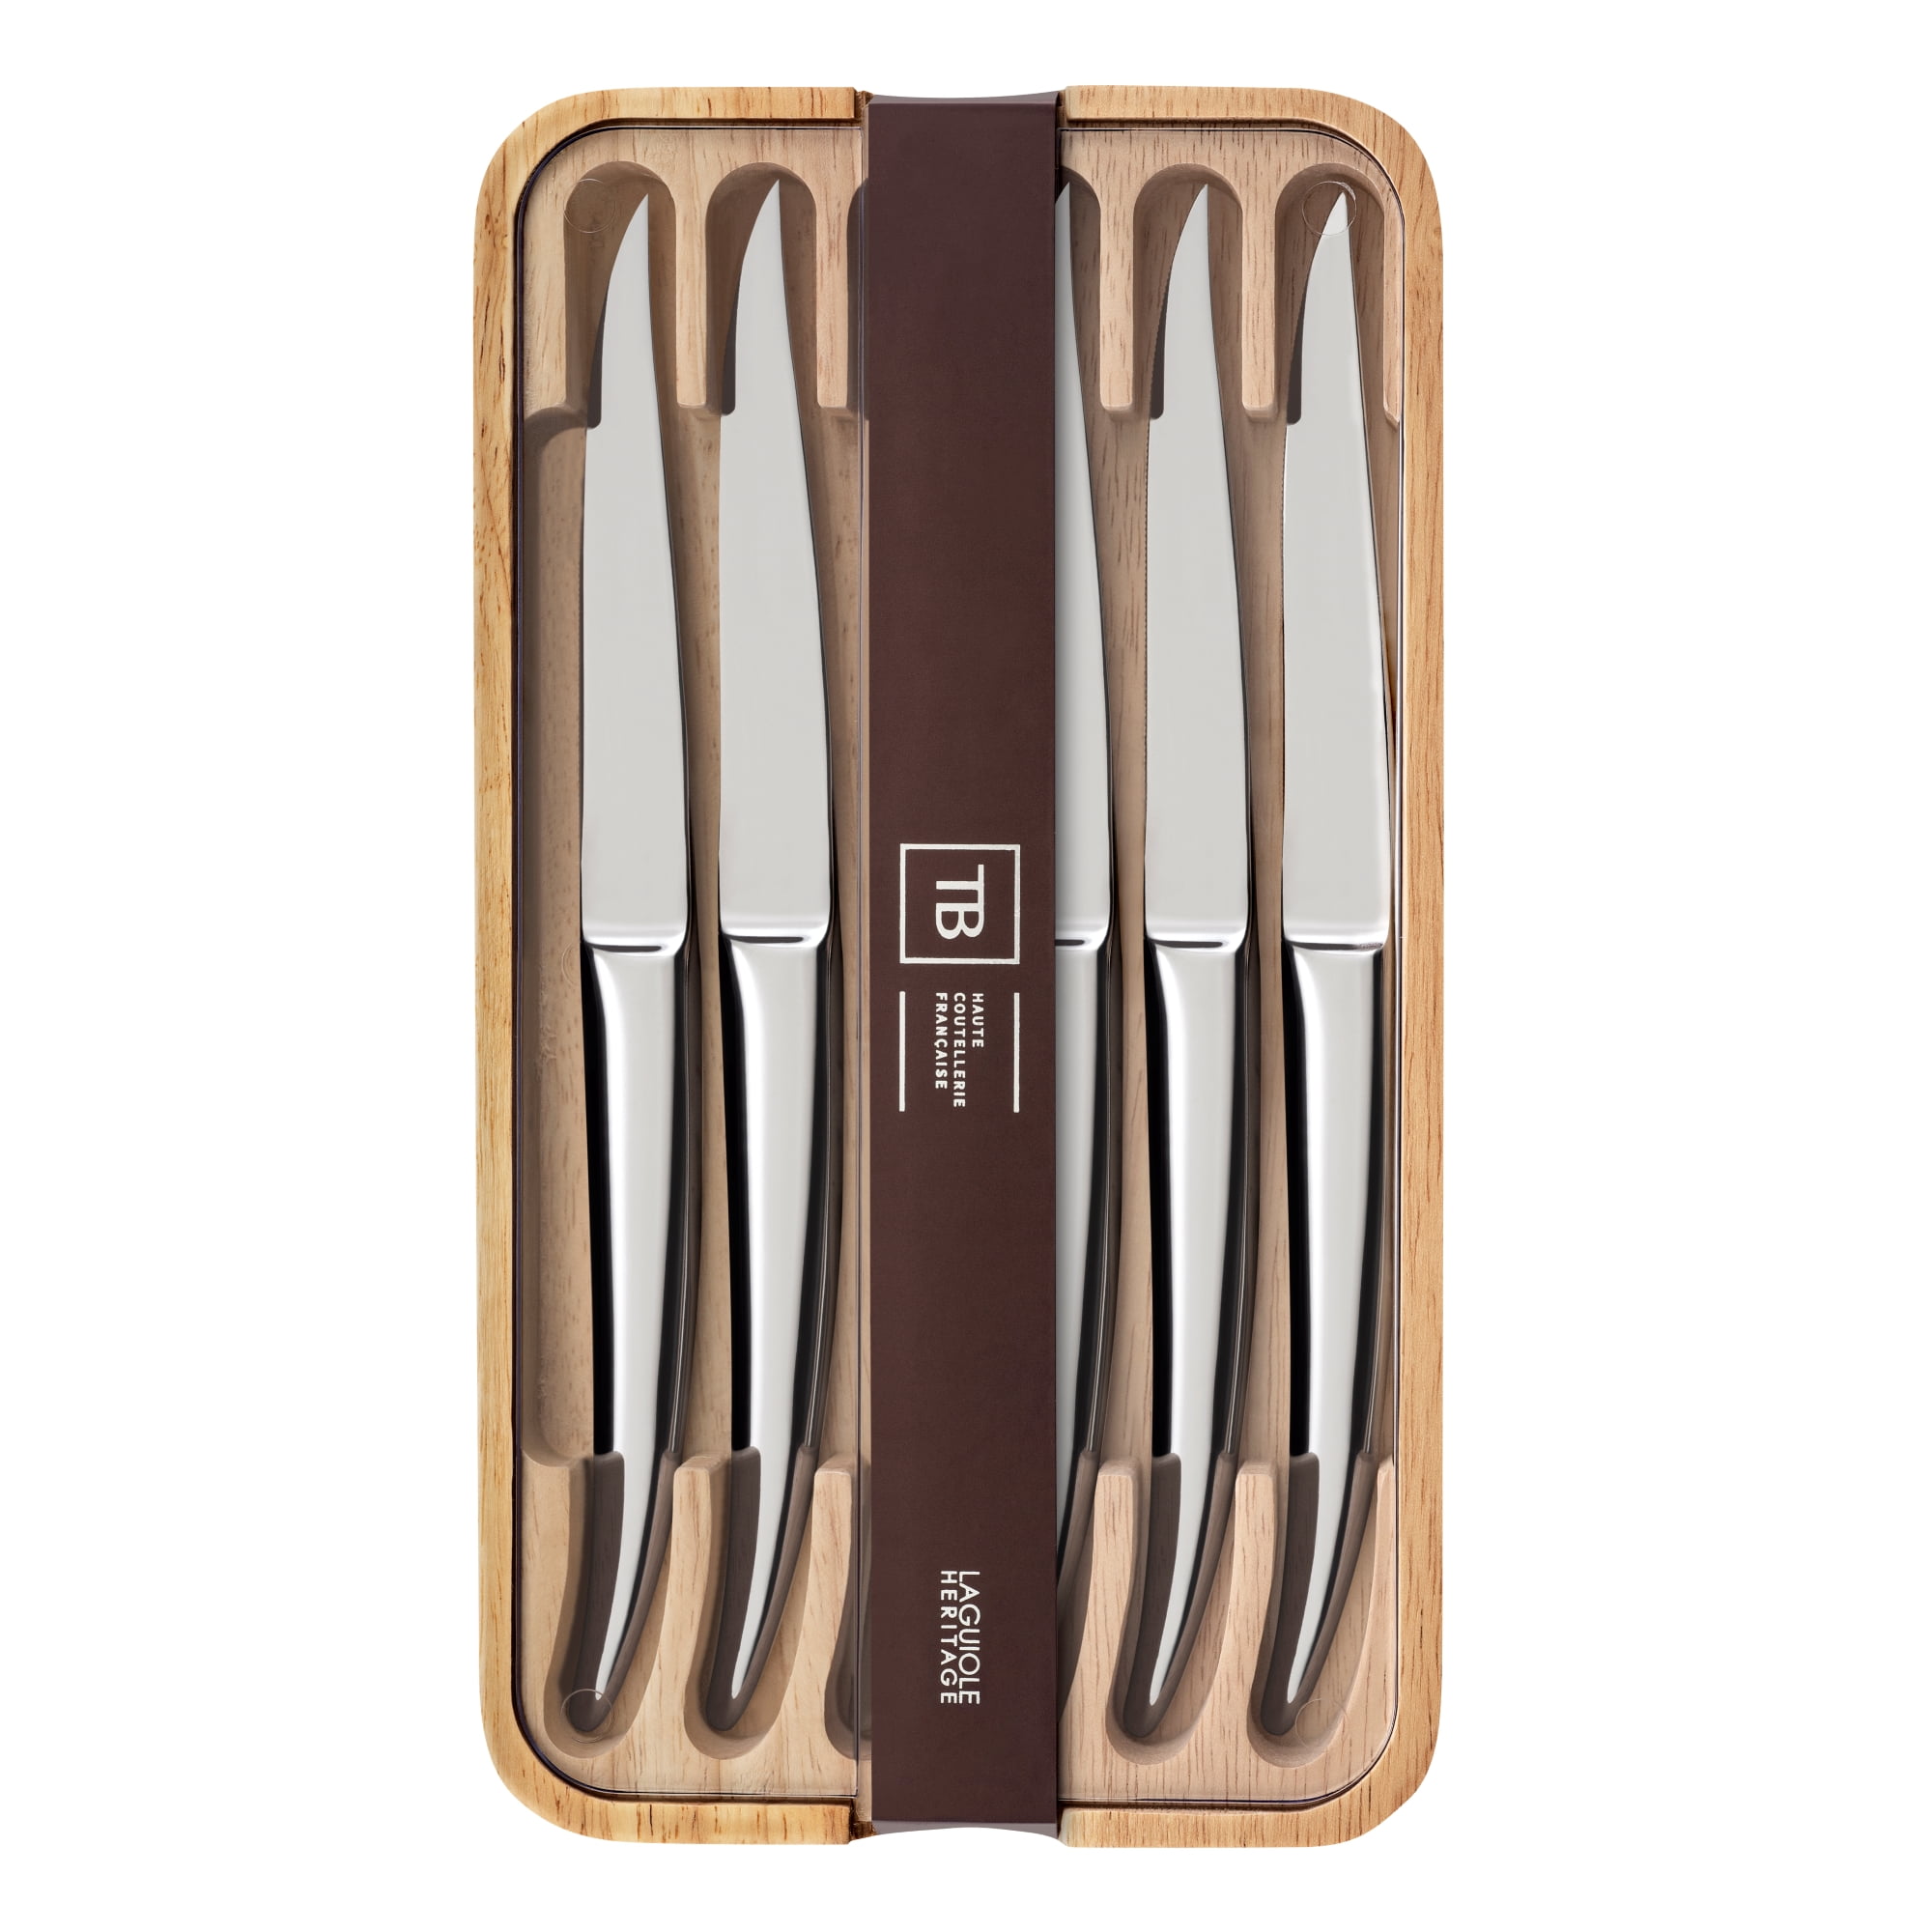 Set of 6 laguiole steak knives with Pink Madreperlato handle and